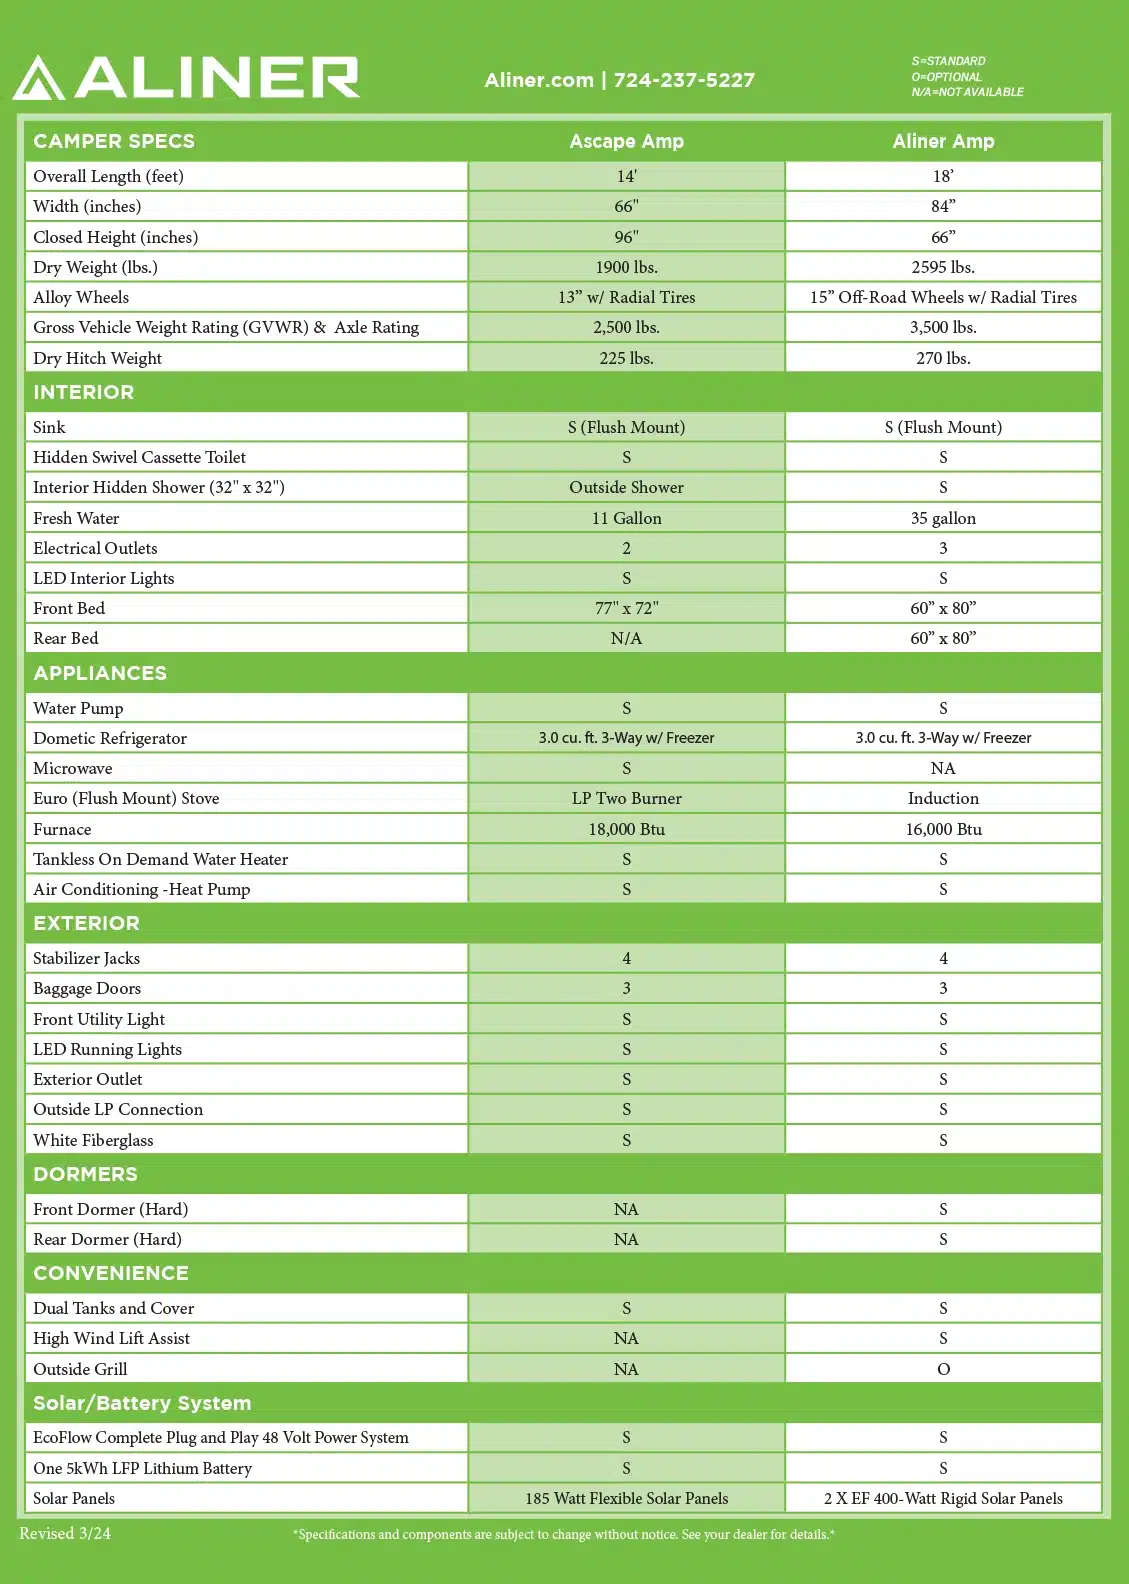 Technical specification chart for a-liner camper models, detailing features and dimensions.